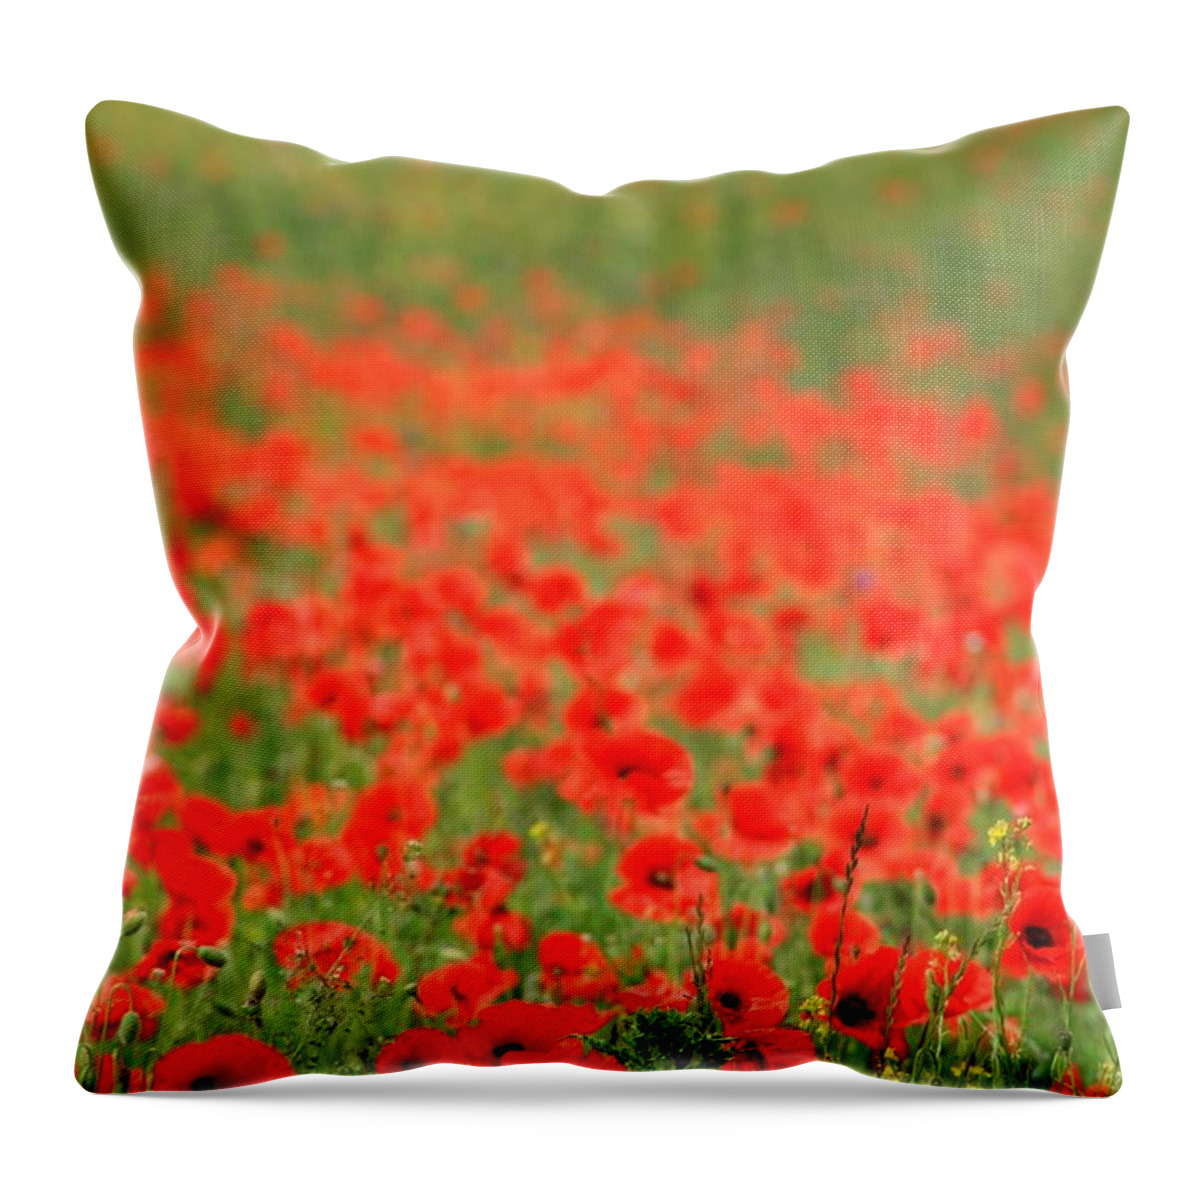 Tranquility Throw Pillow featuring the photograph Red Flowers by Ian Hadingham